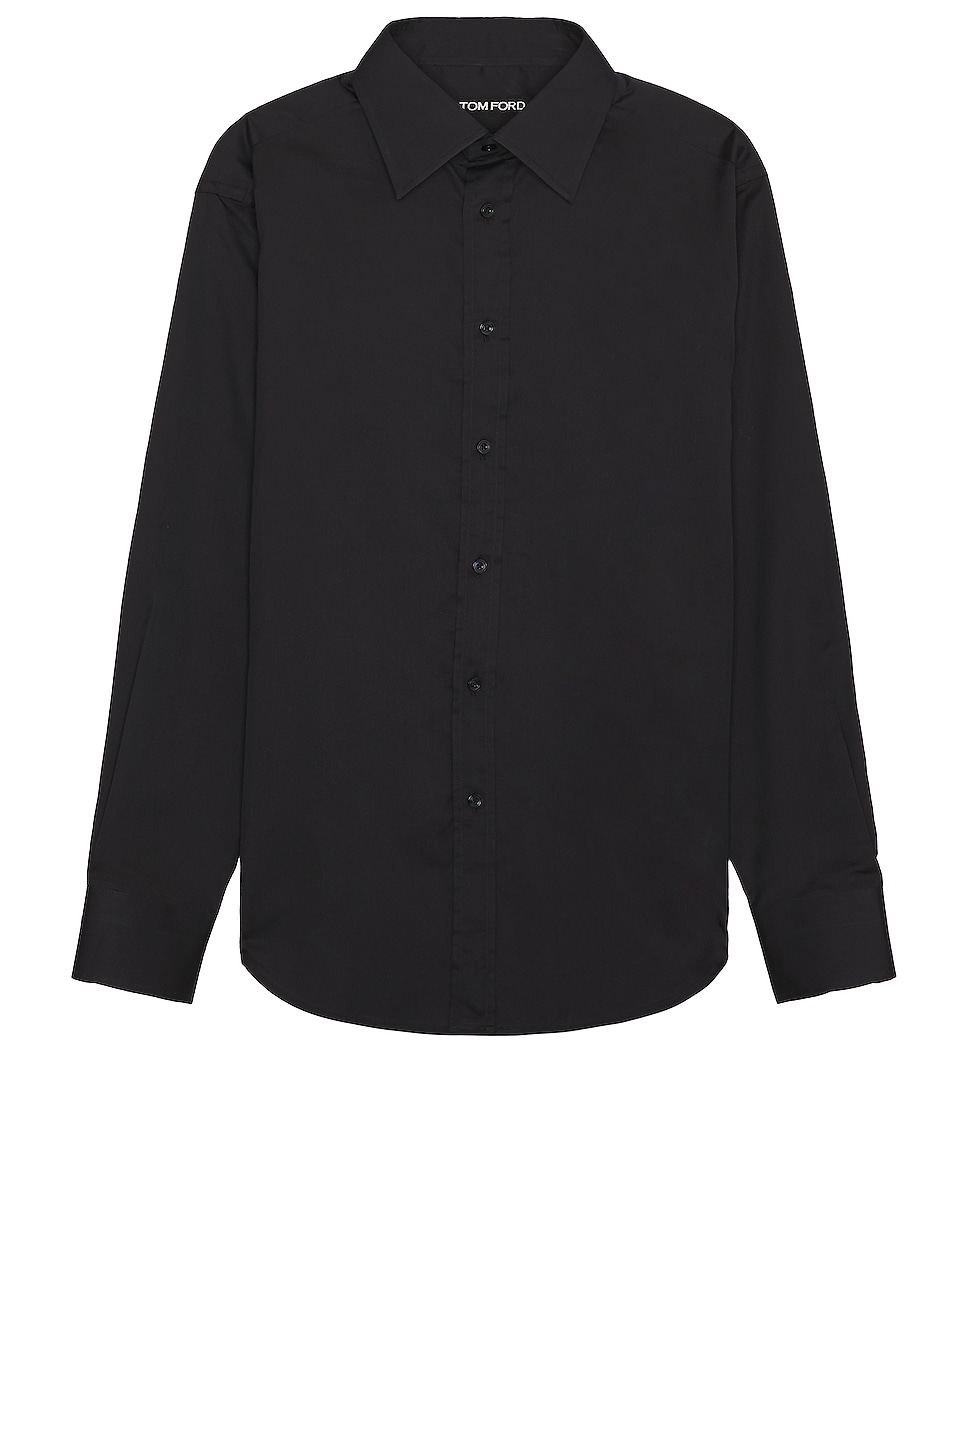 Image 1 of TOM FORD Cotton Silk Serge Fluid Fit Shirt in Black